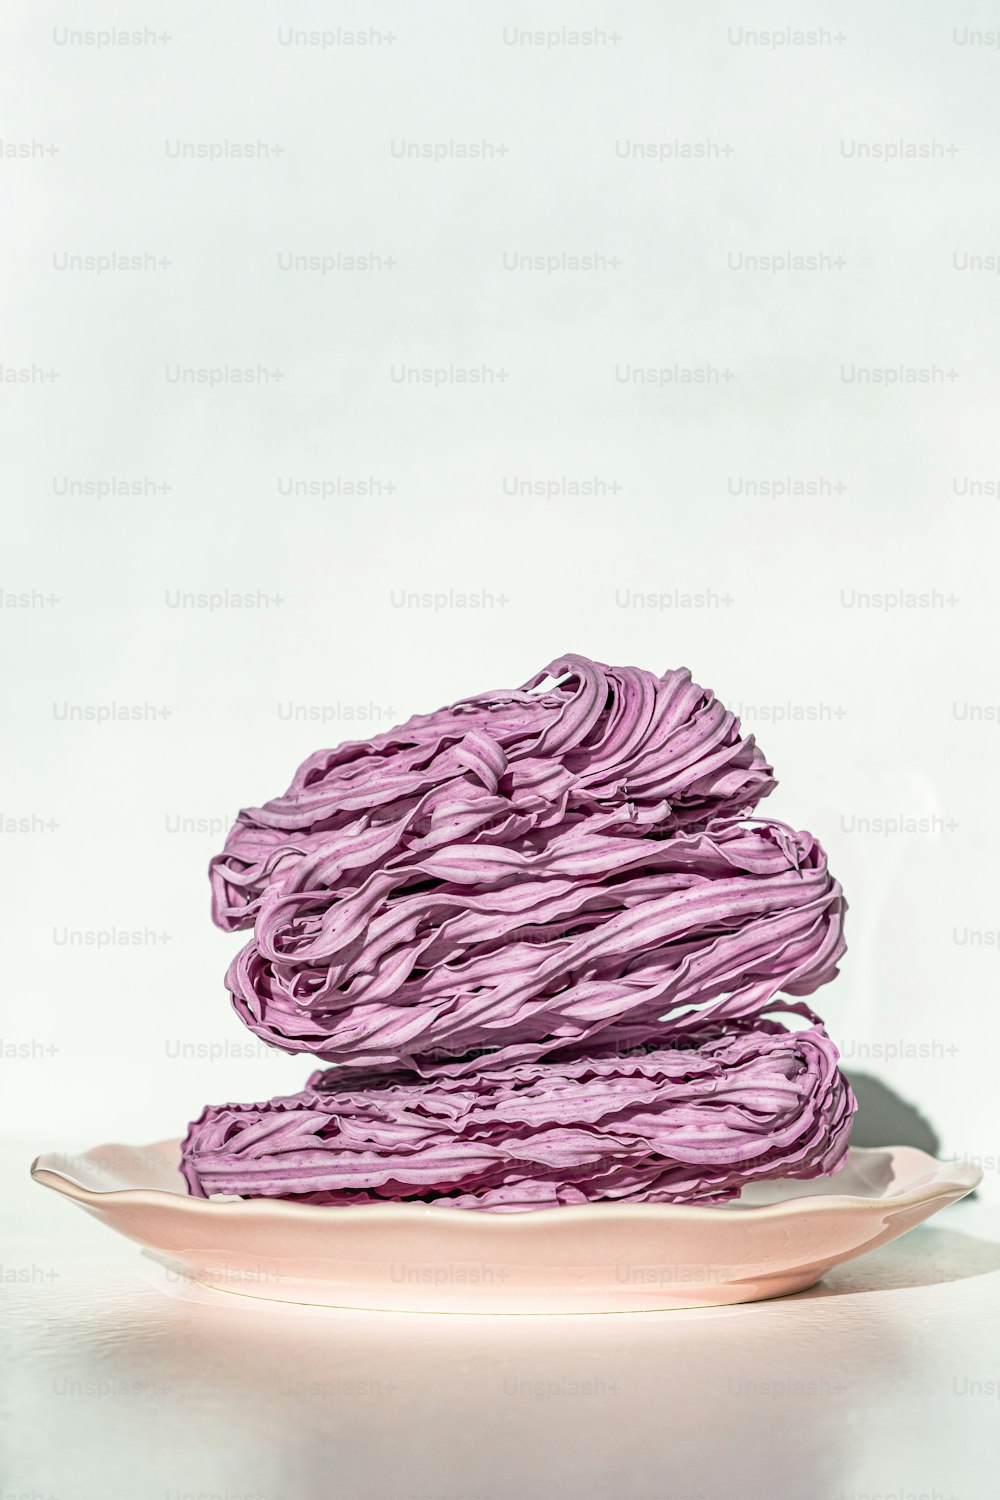 a plate with a stack of purple cloths on it